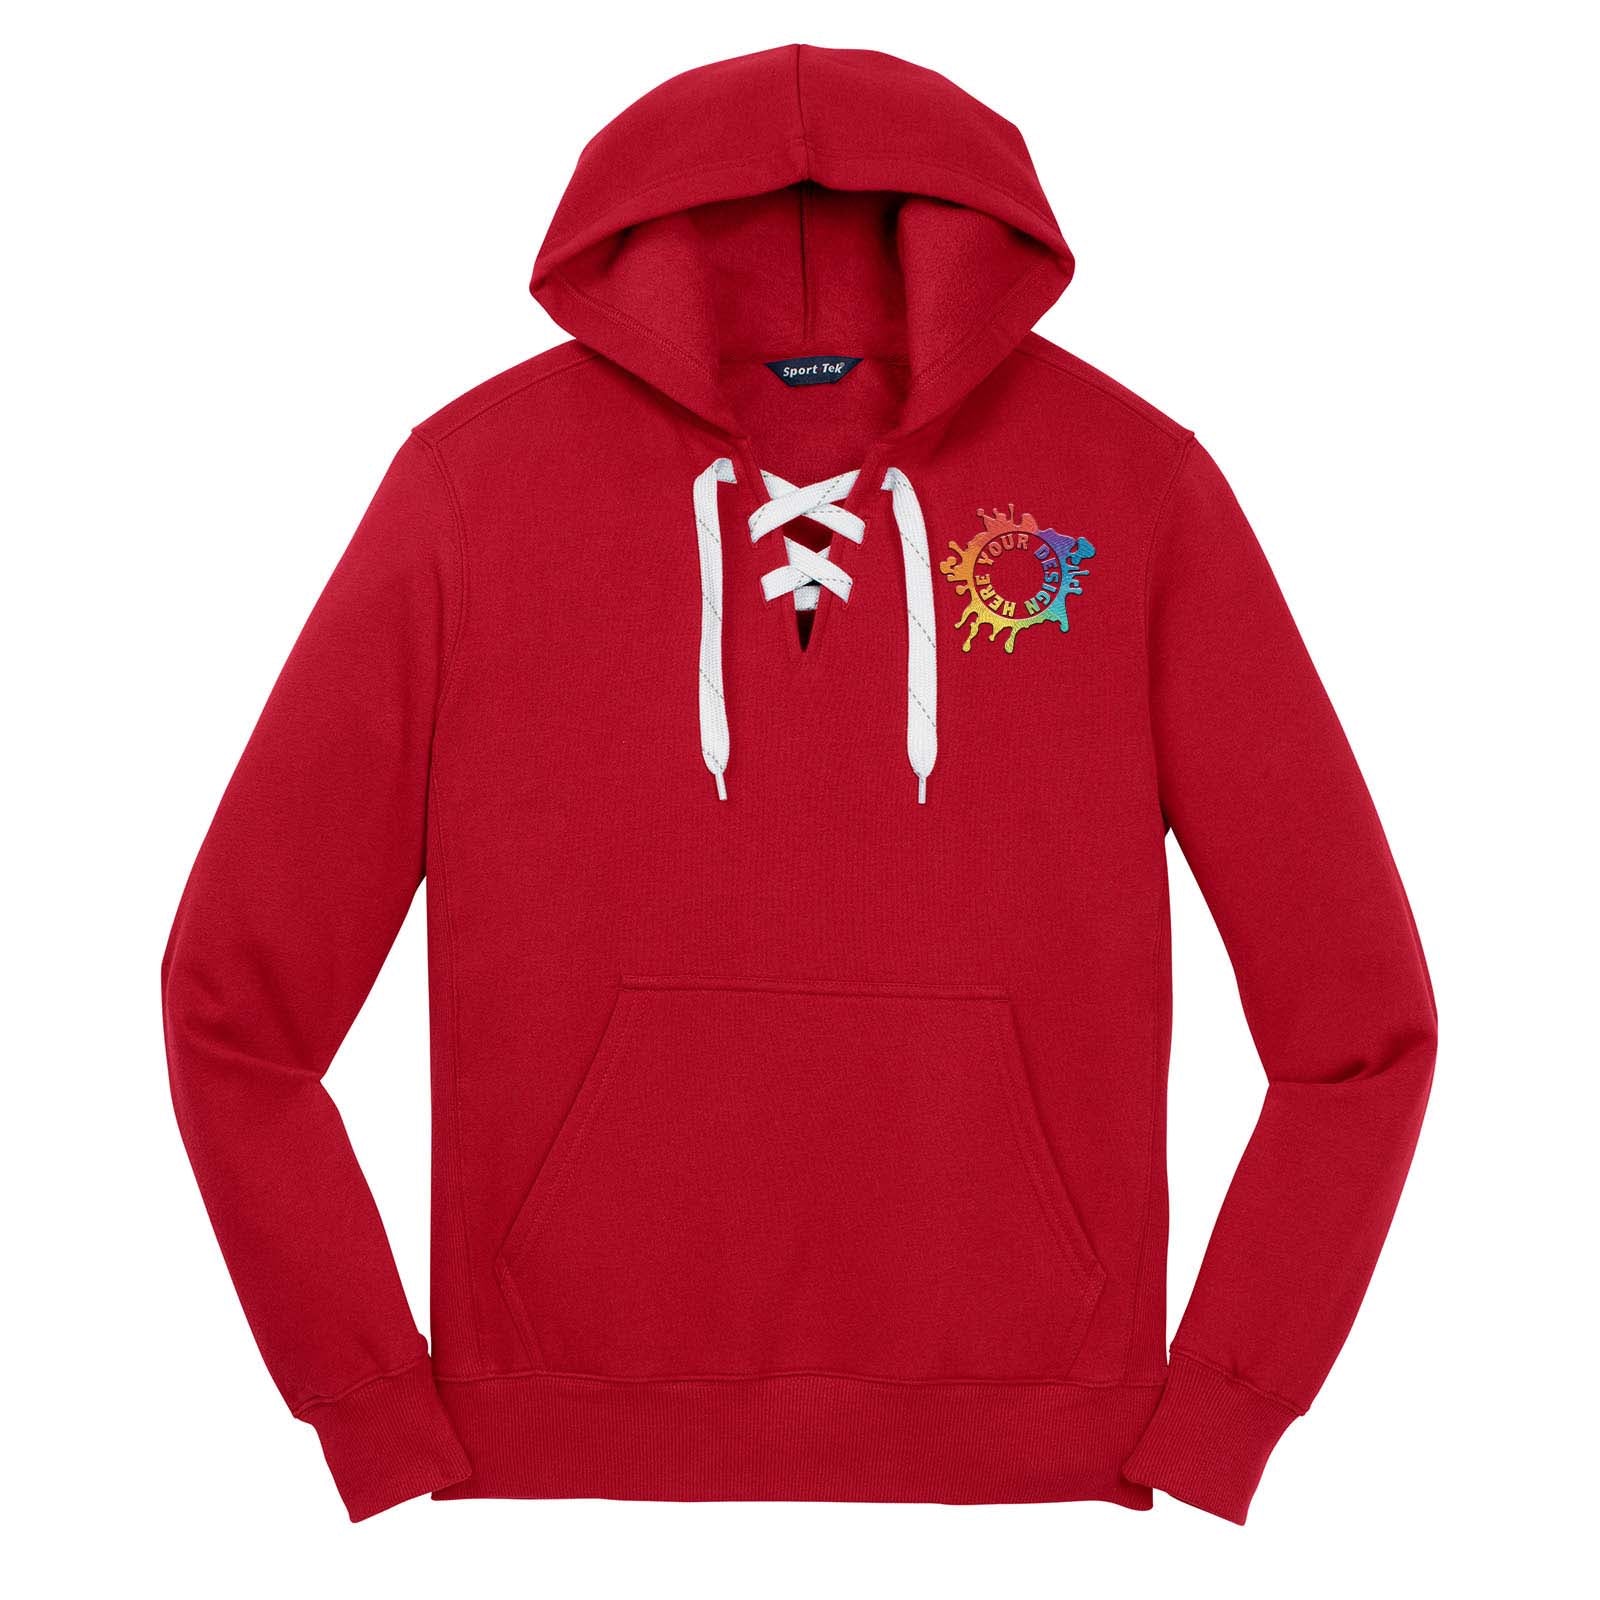 Sport Tek Men's Lace Up Pullover Hooded Sweatshirt Embroidery - Mato & Hash